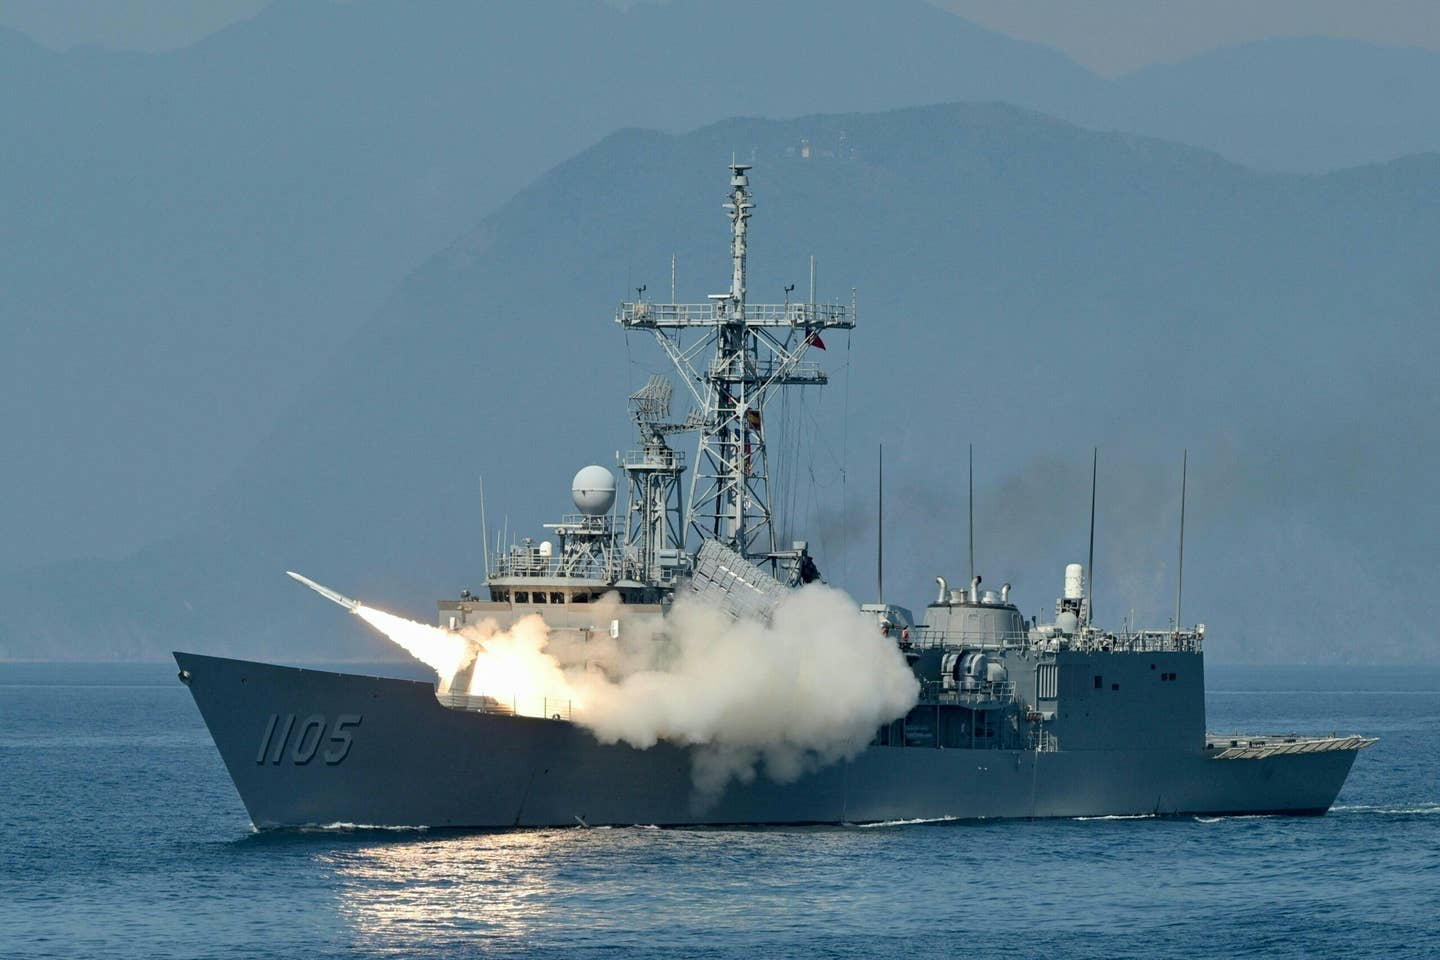 Taiwanese navy launches a US-made Standard missile from a frigate during the annual Han Kuang Drill, on the sea near the Suao navy harbor in Yilan county on July 26, 2022. (Photo by Sam Yeh / AFP) (Photo by SAM YEH/AFP via Getty Images)